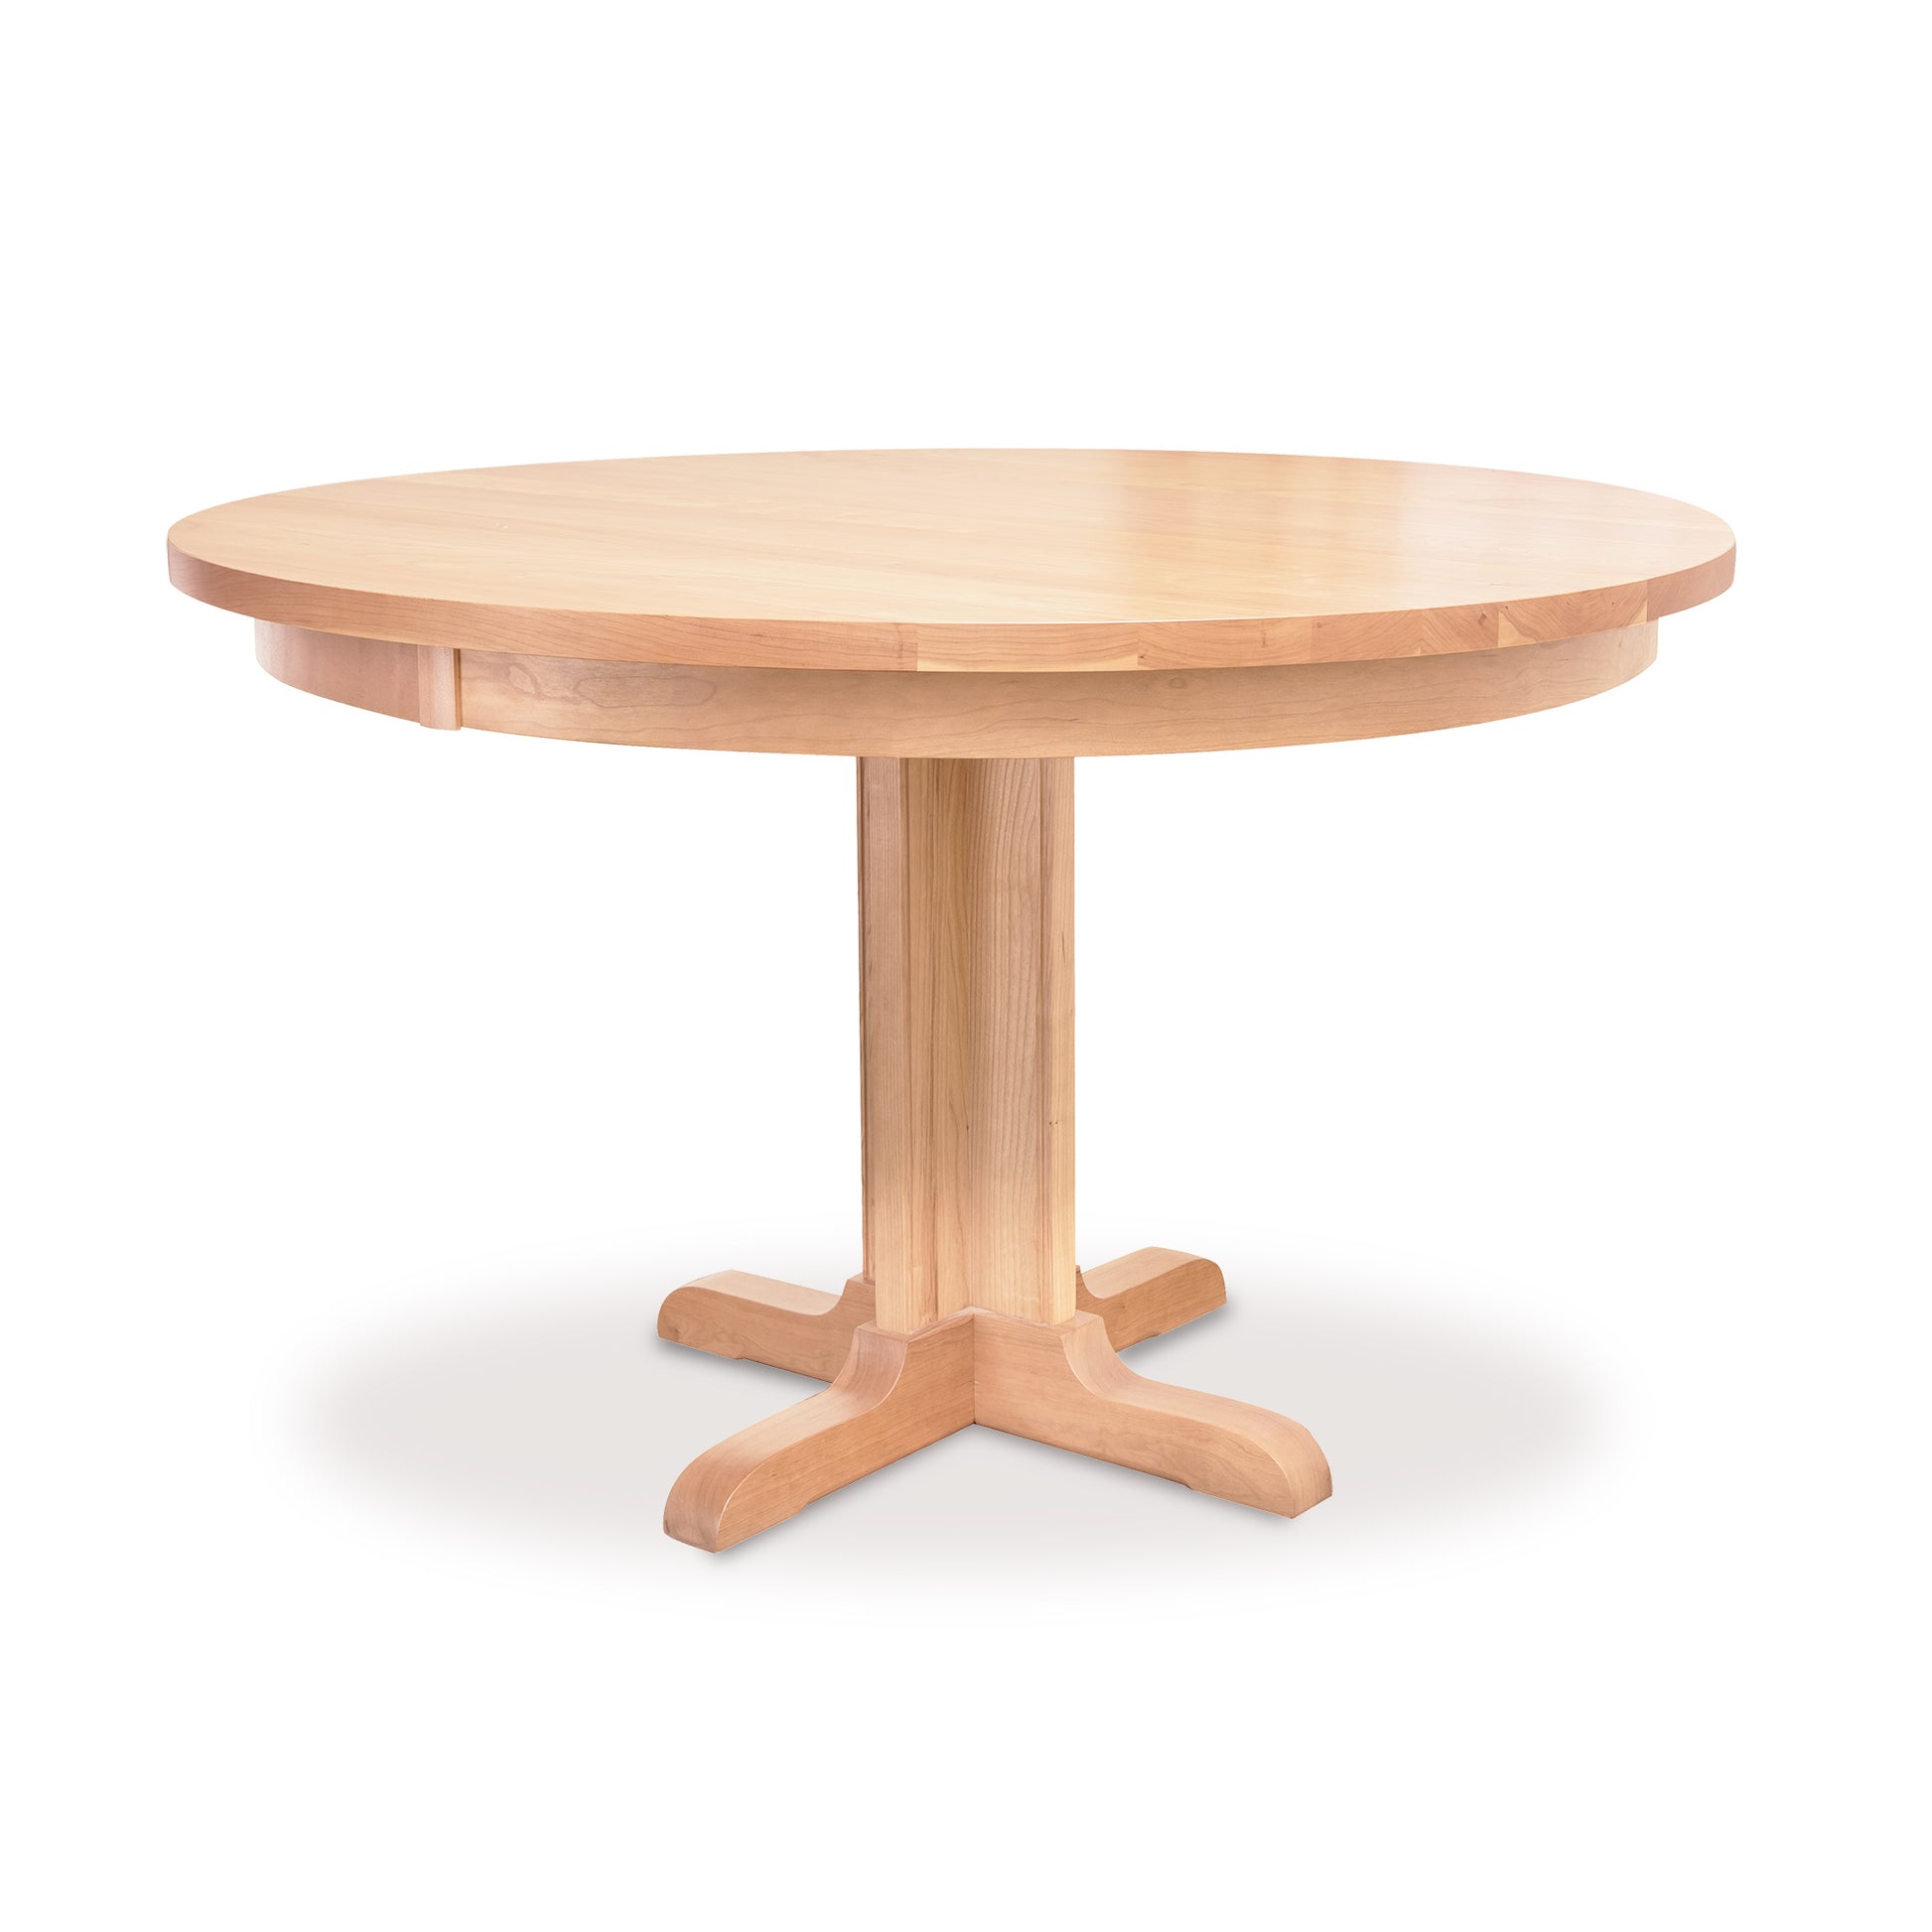 A sturdy Single - Leg Round Pedestal Table with a solid wooden base by Lyndon Furniture.